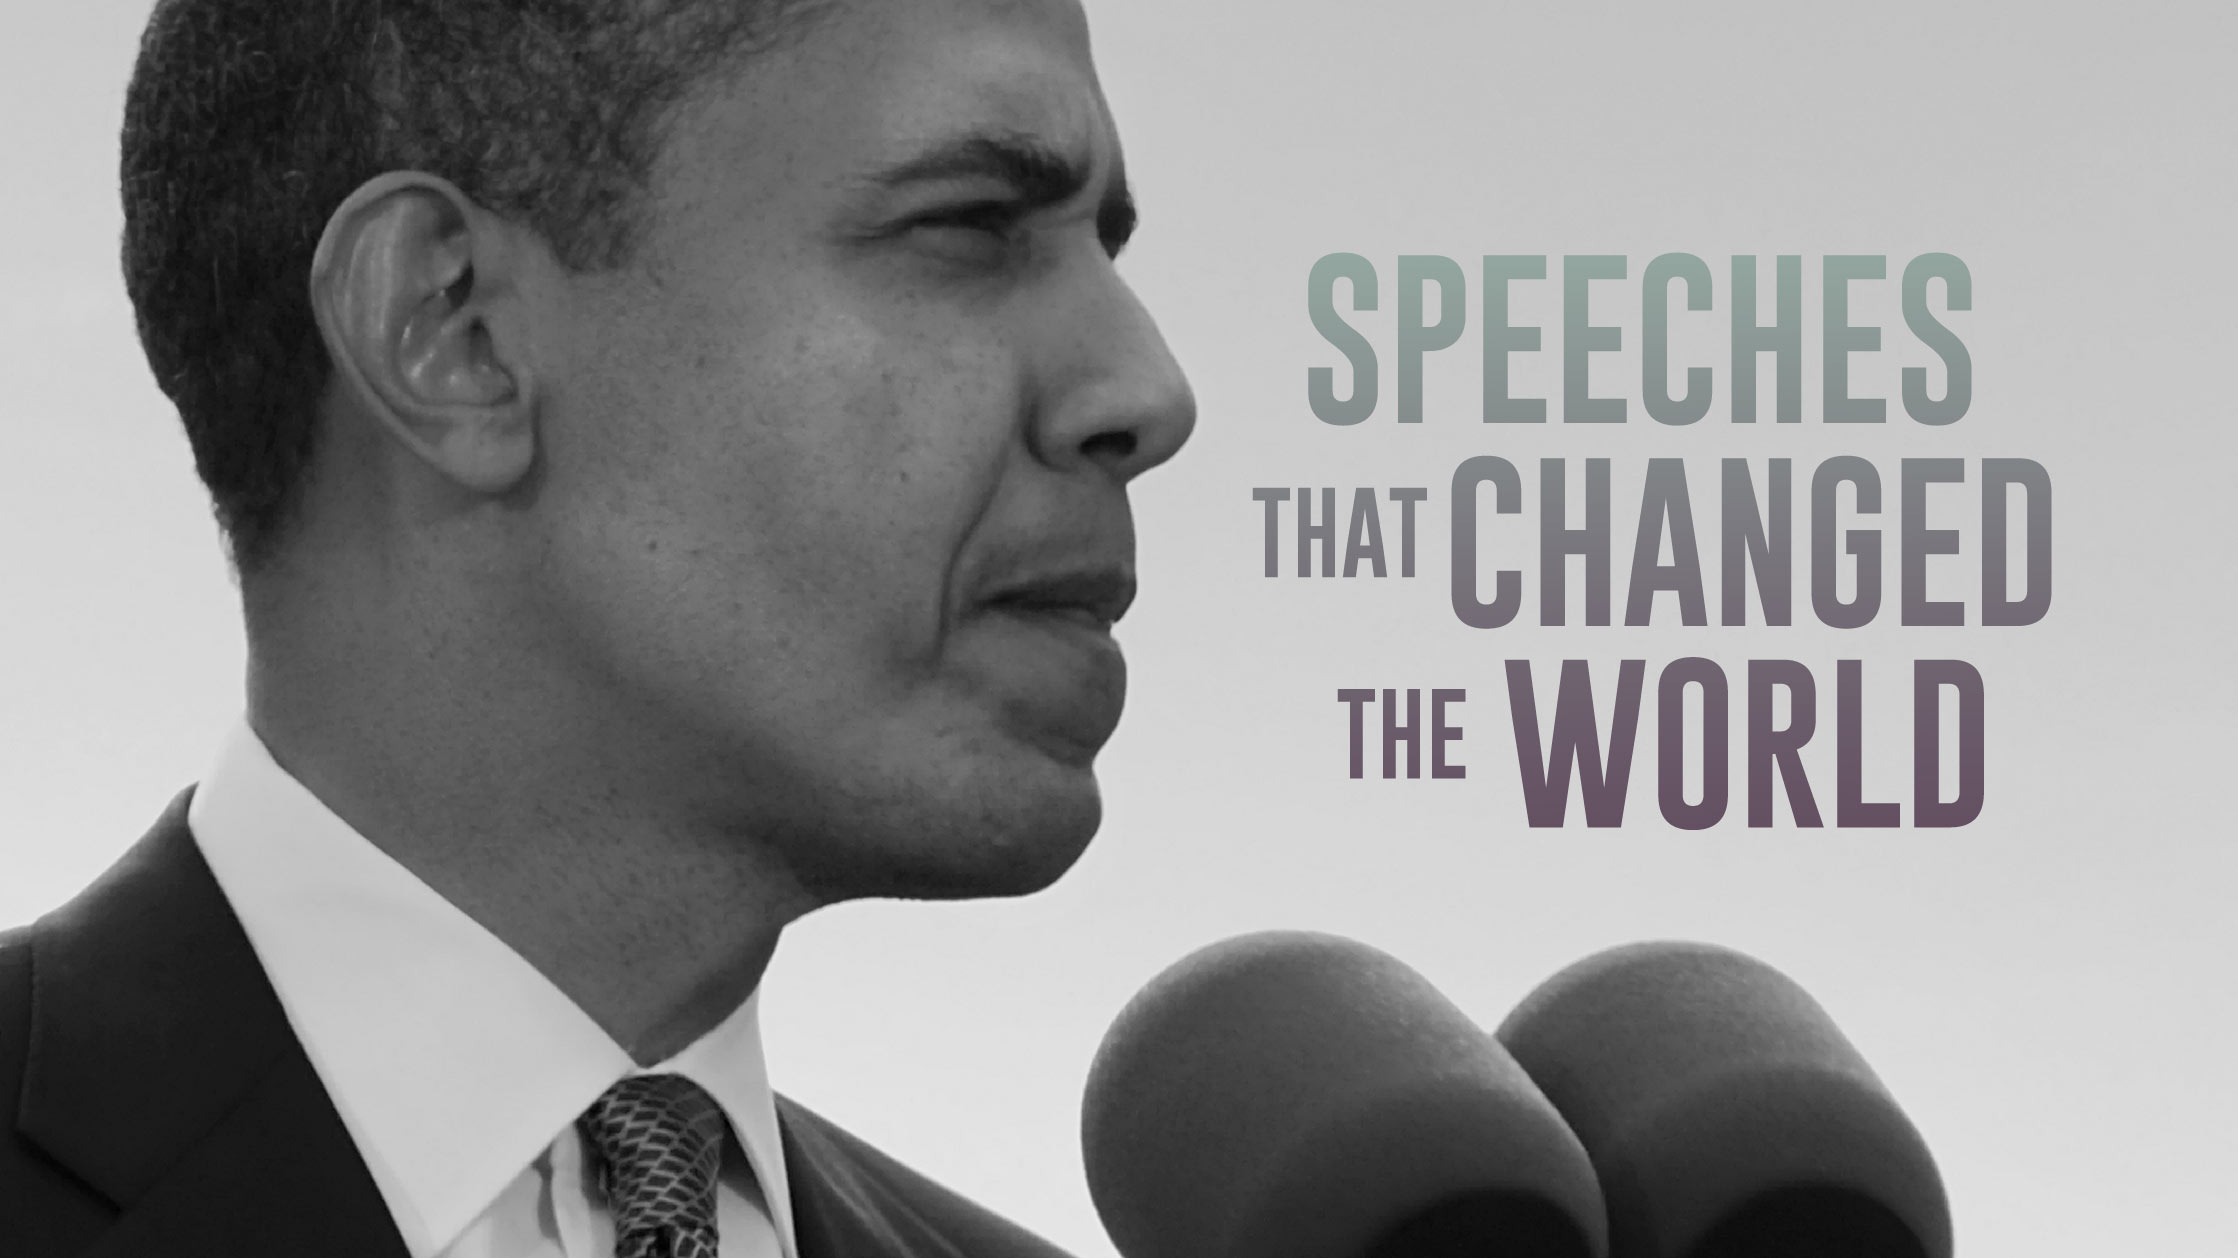 3 famous speeches that changed the world